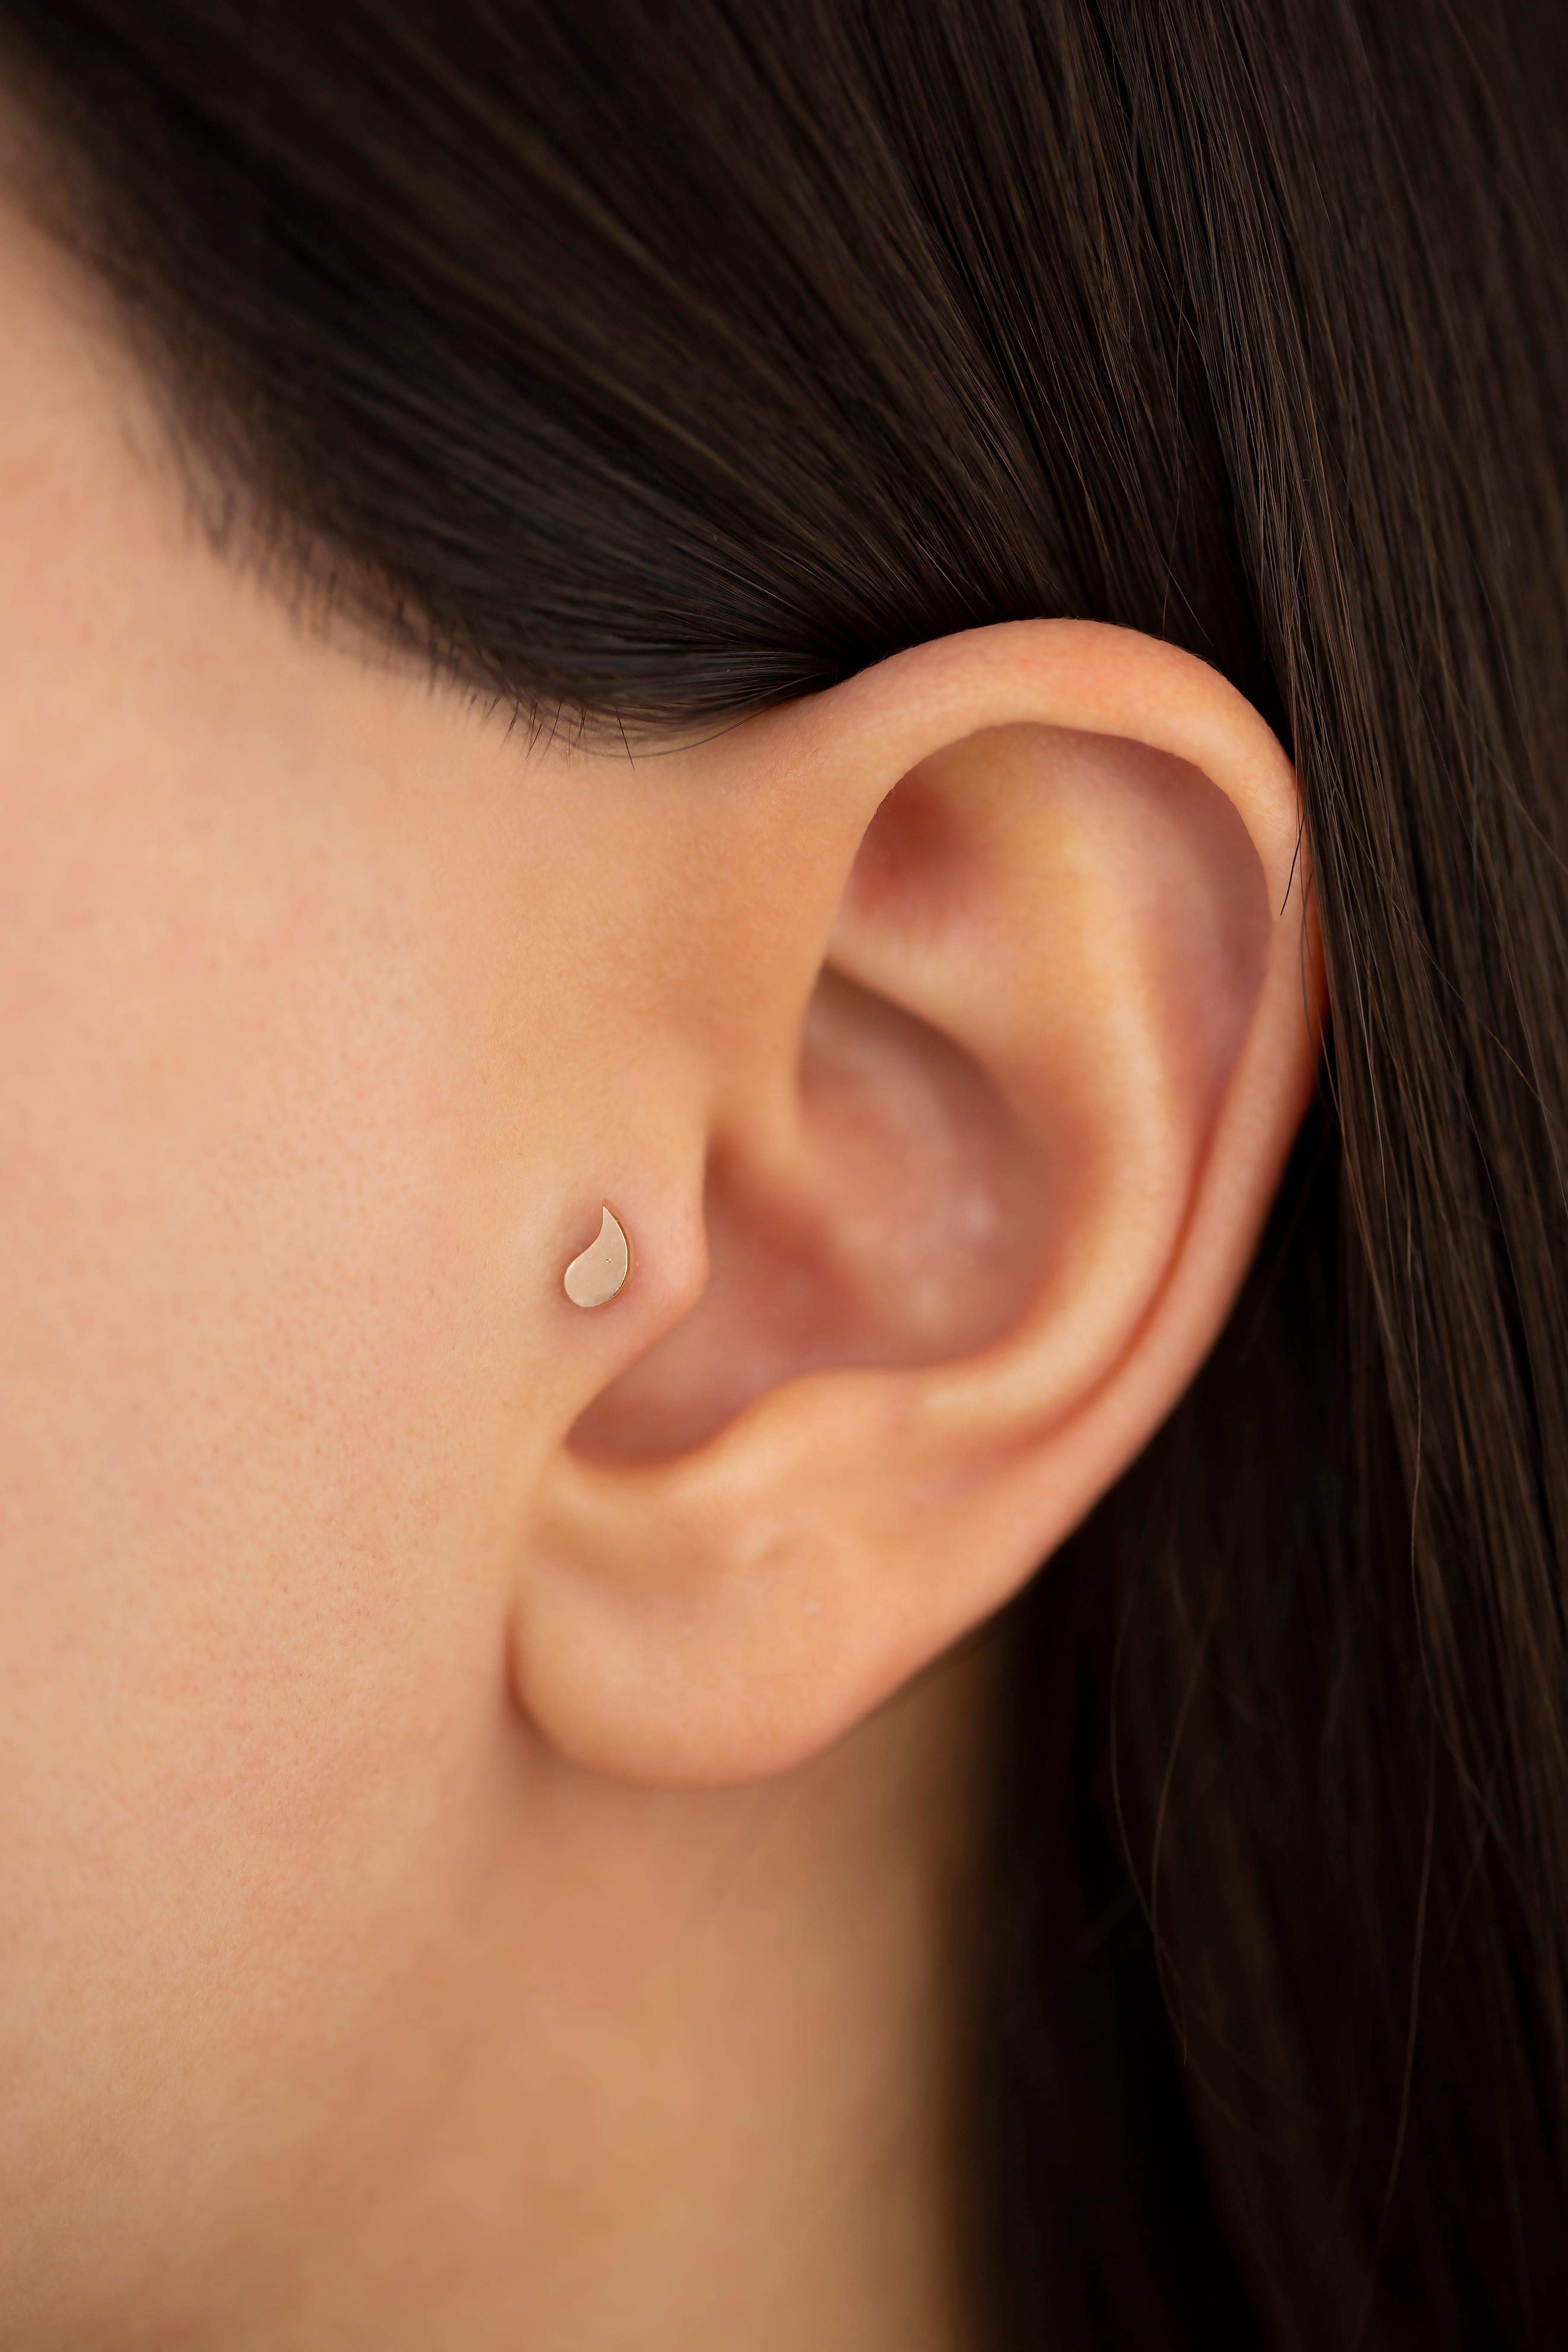 14K Rose Gold Tear Shape Piercing, Tear Drop Gold Stud Earring

You can use the piercing as an earring too! Also this piercing is suitable for tragus, nose, helix, lobe, flat, medusa, monreo, labret and stud.

This piercing was made with quality